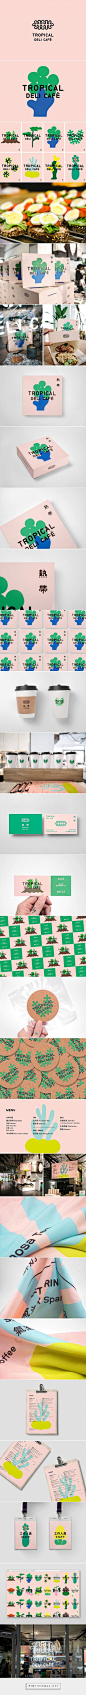 Tropical Deli Café Branding and Menu Design by Jay Guan-Jie Peng | Fivestar Branding Agency – Design and Branding Agency & Curated Inspiration Gallery